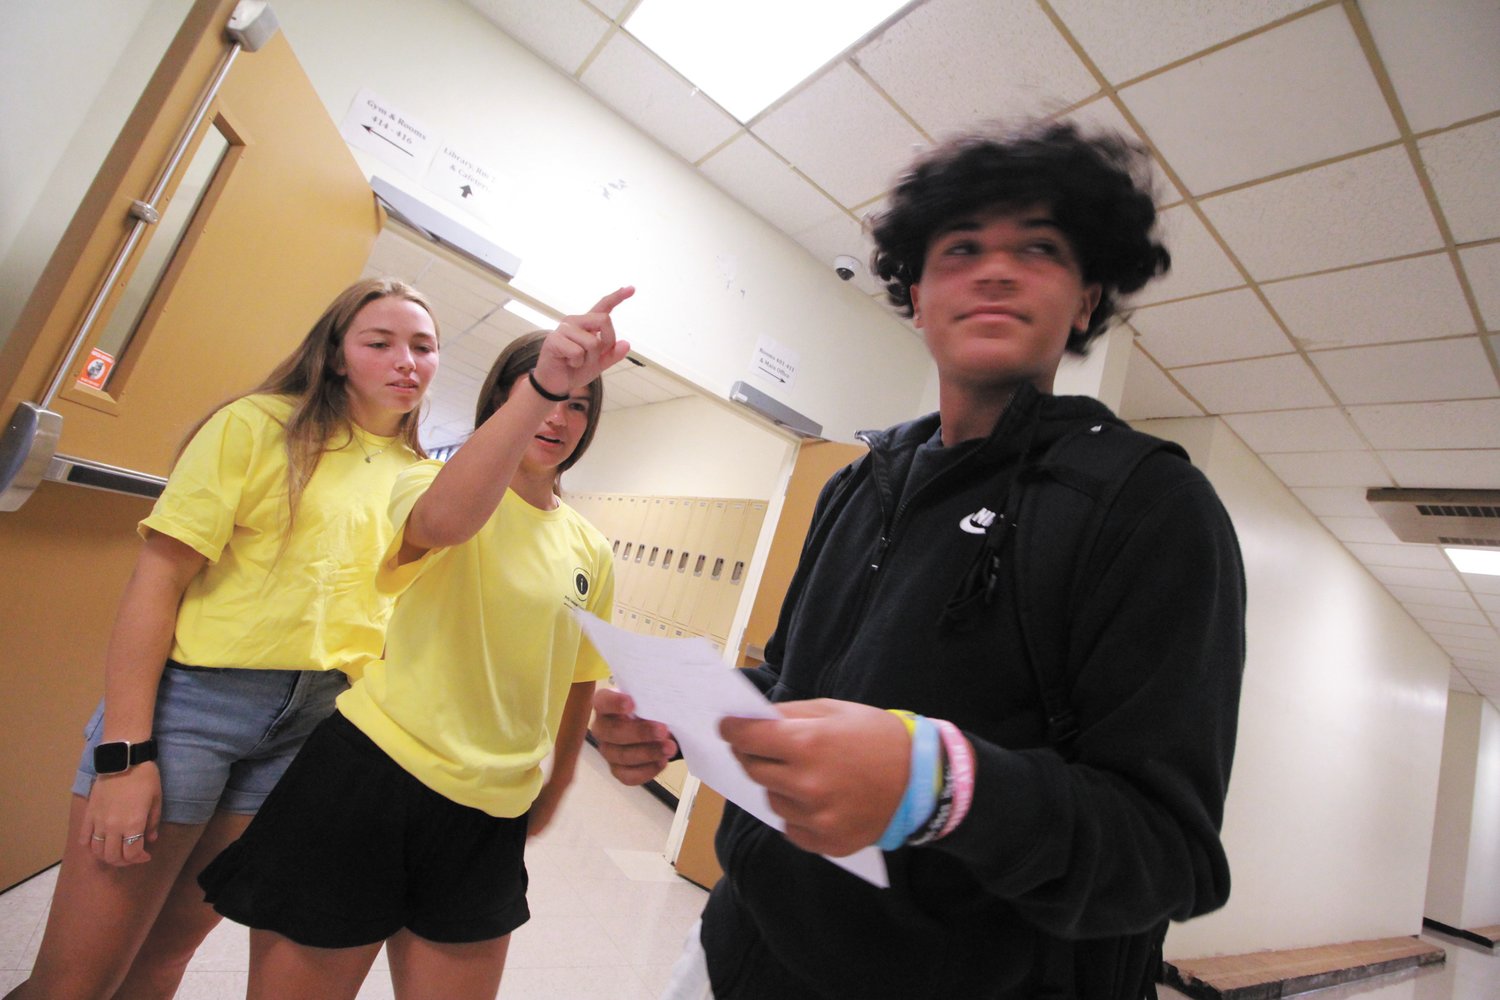 THERE TO ASSIST: Pilgrim seniors dressed in matching yellow T-shirts served as guides for freshmen who started classes Wednesday. Here Chloe French and Katie Shaeen assist Manny Rivas.